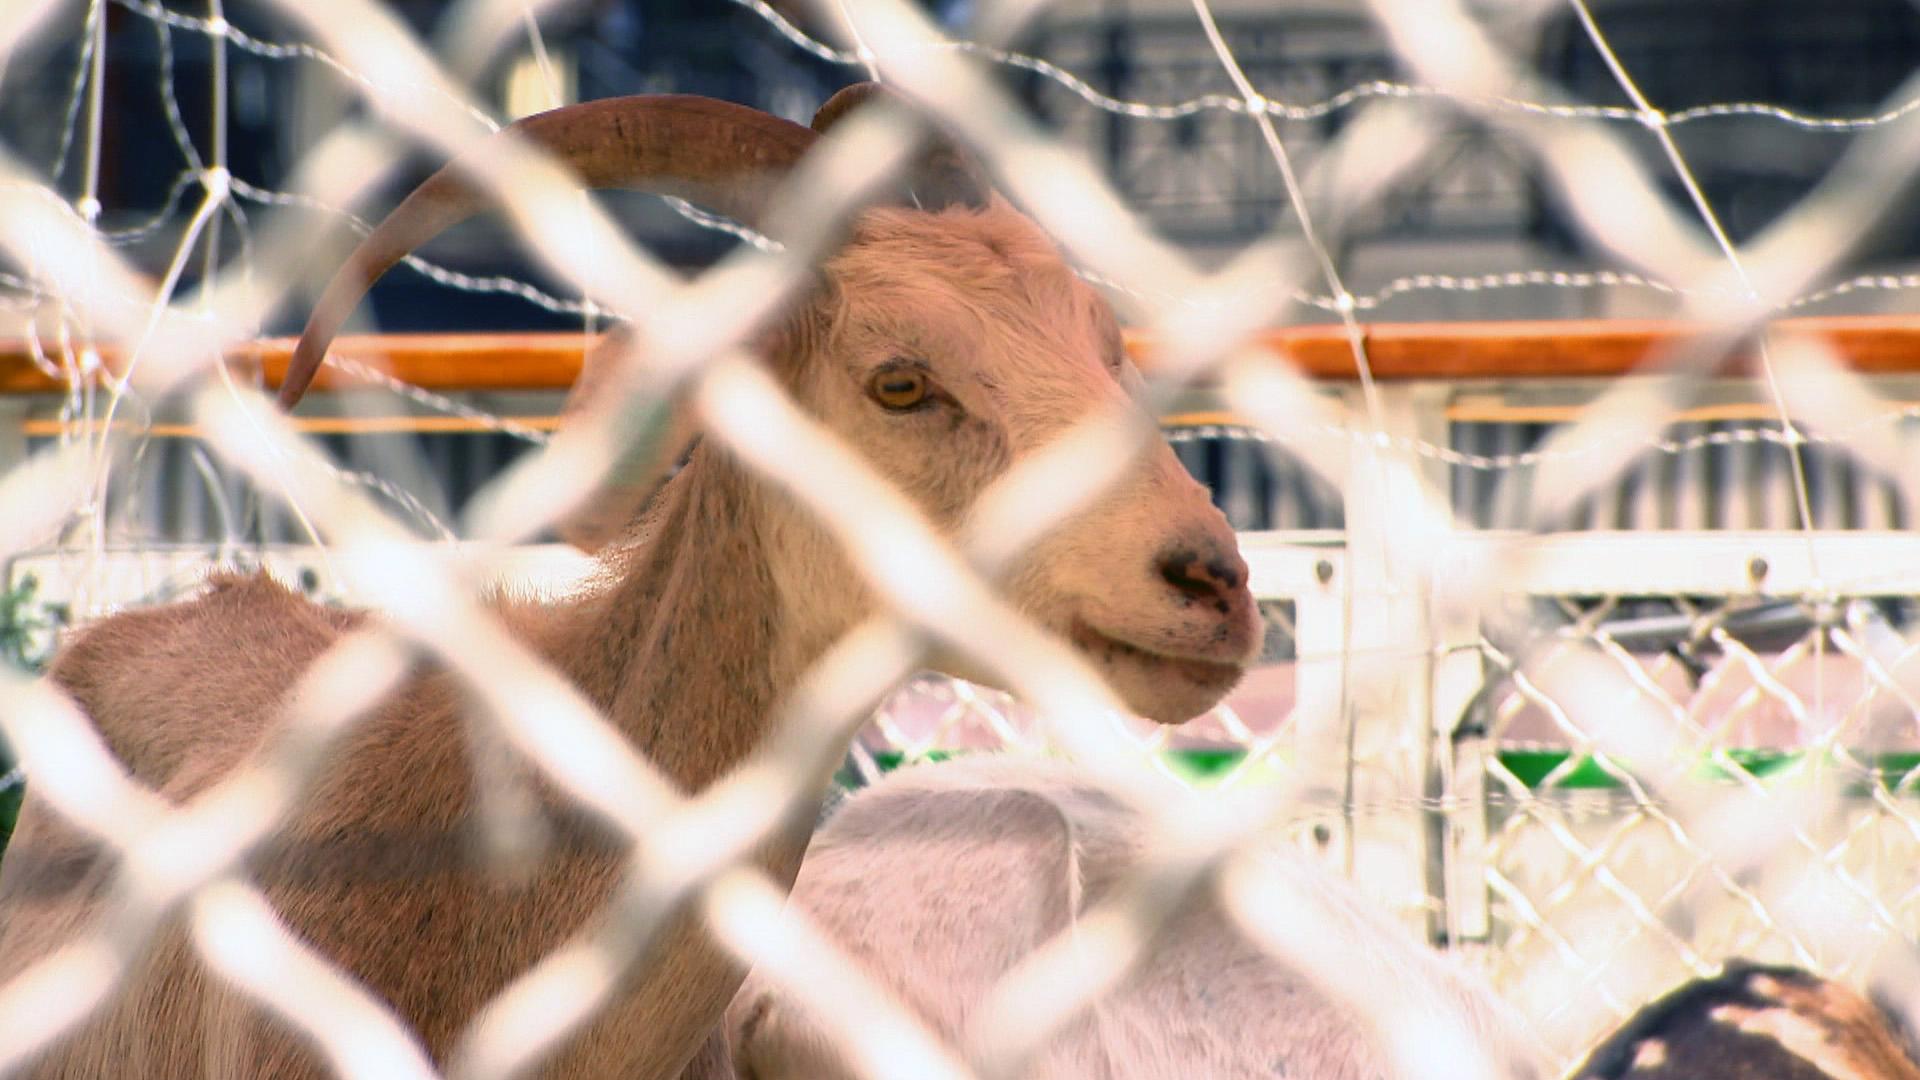 A goat on a boat. (WTTW News)